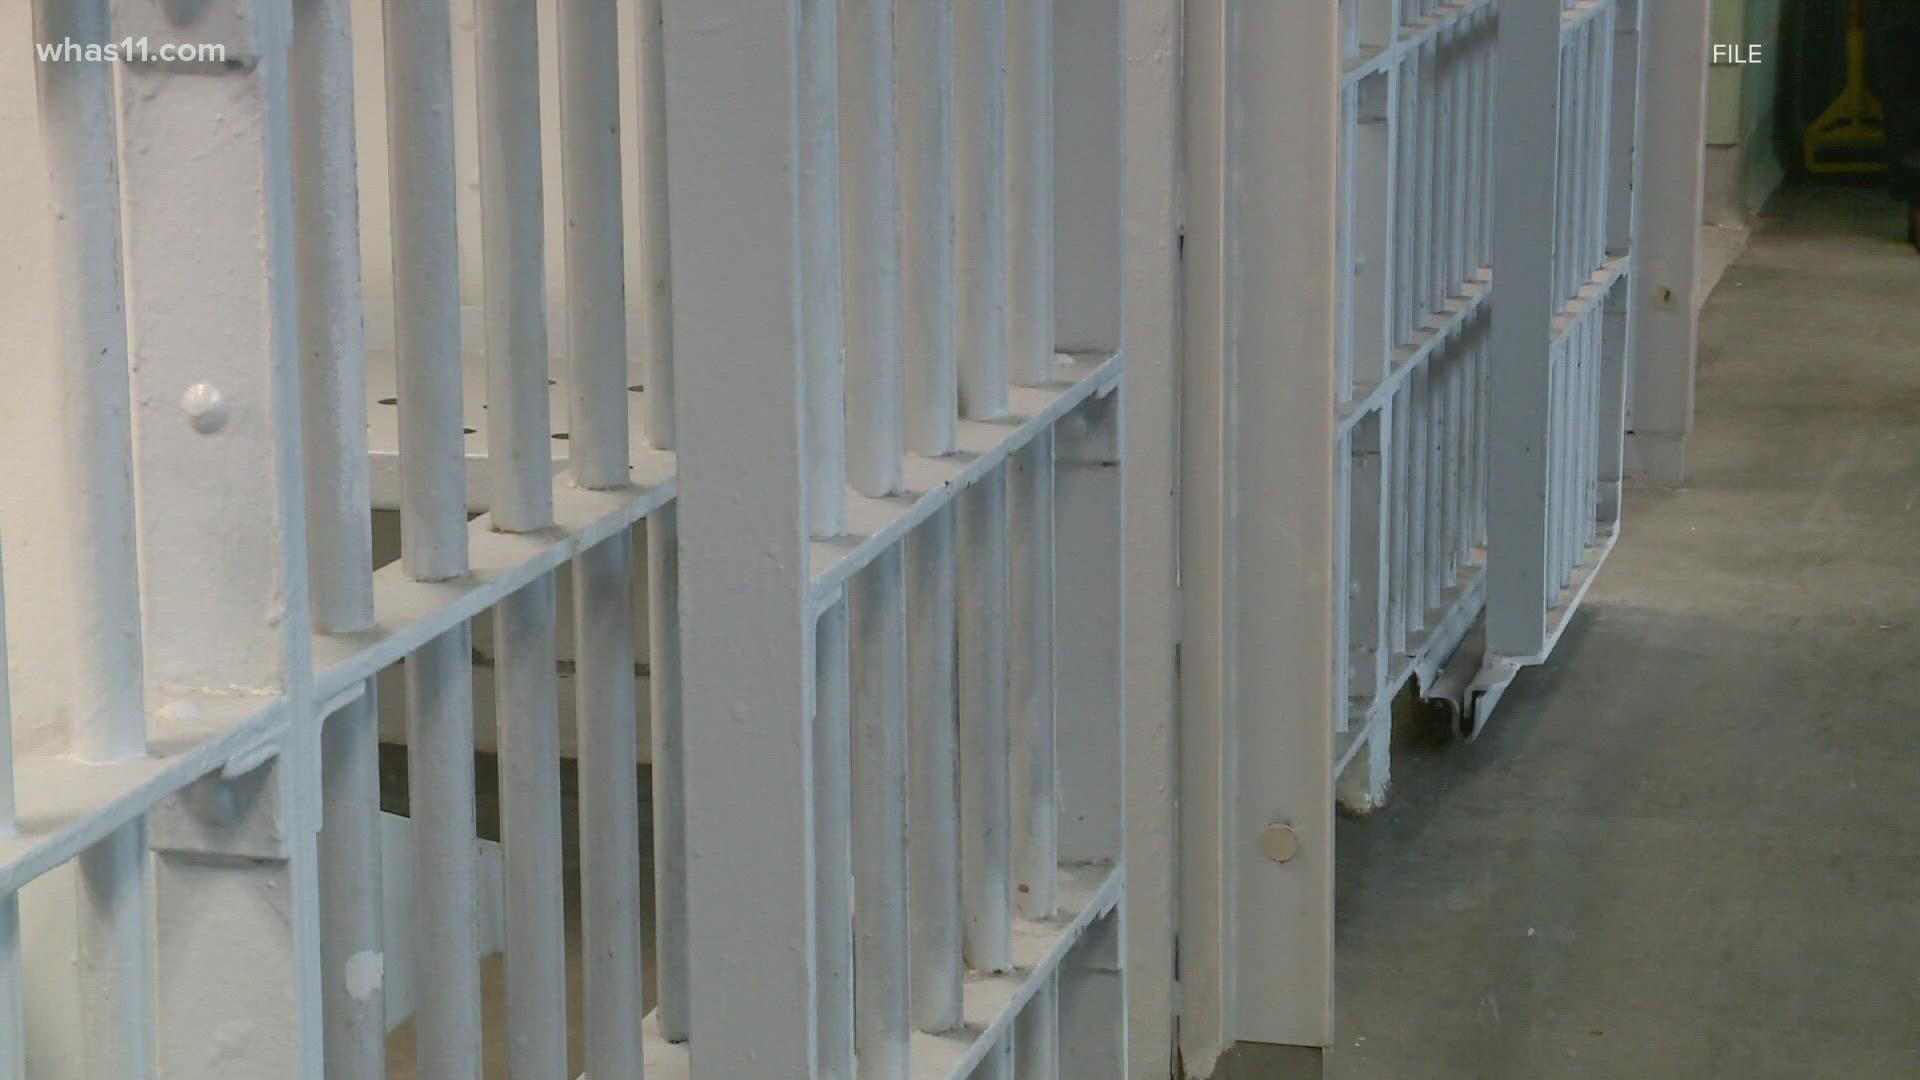 Incarcerated people in Lee County say state prison lacks heating |  